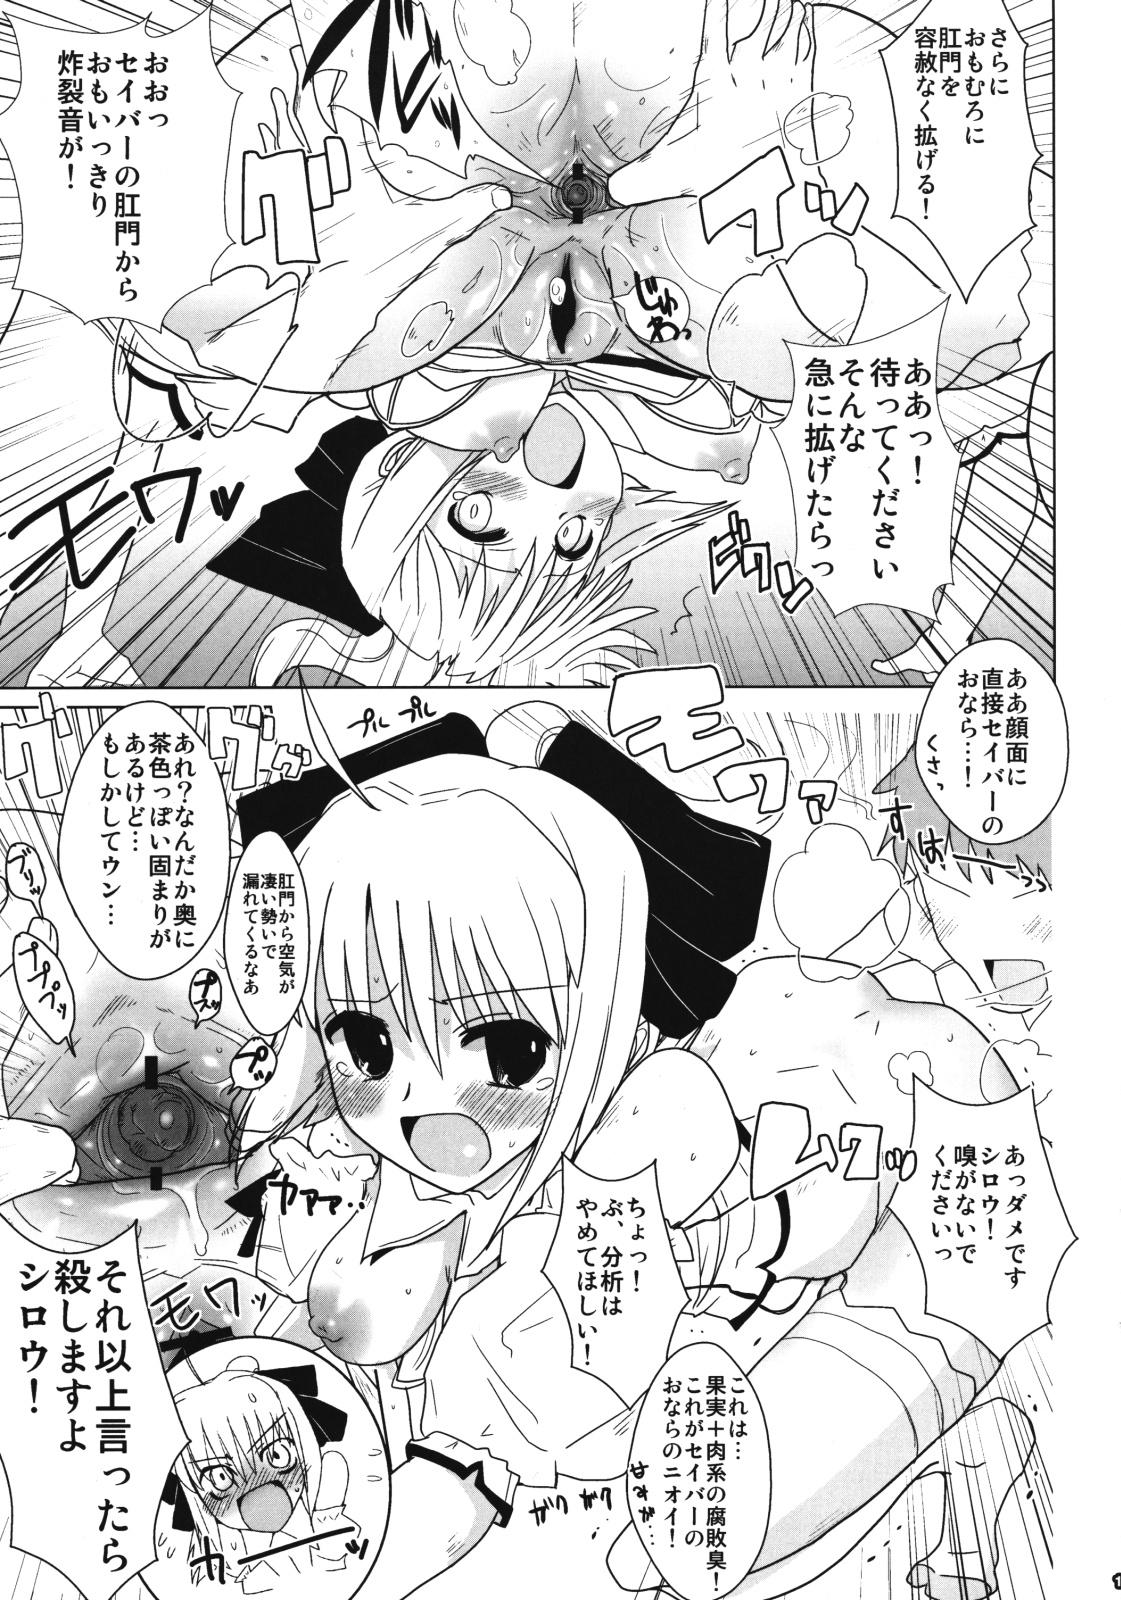 Cumswallow Lily Holic no Subete - Fate stay night Vergon - Page 12